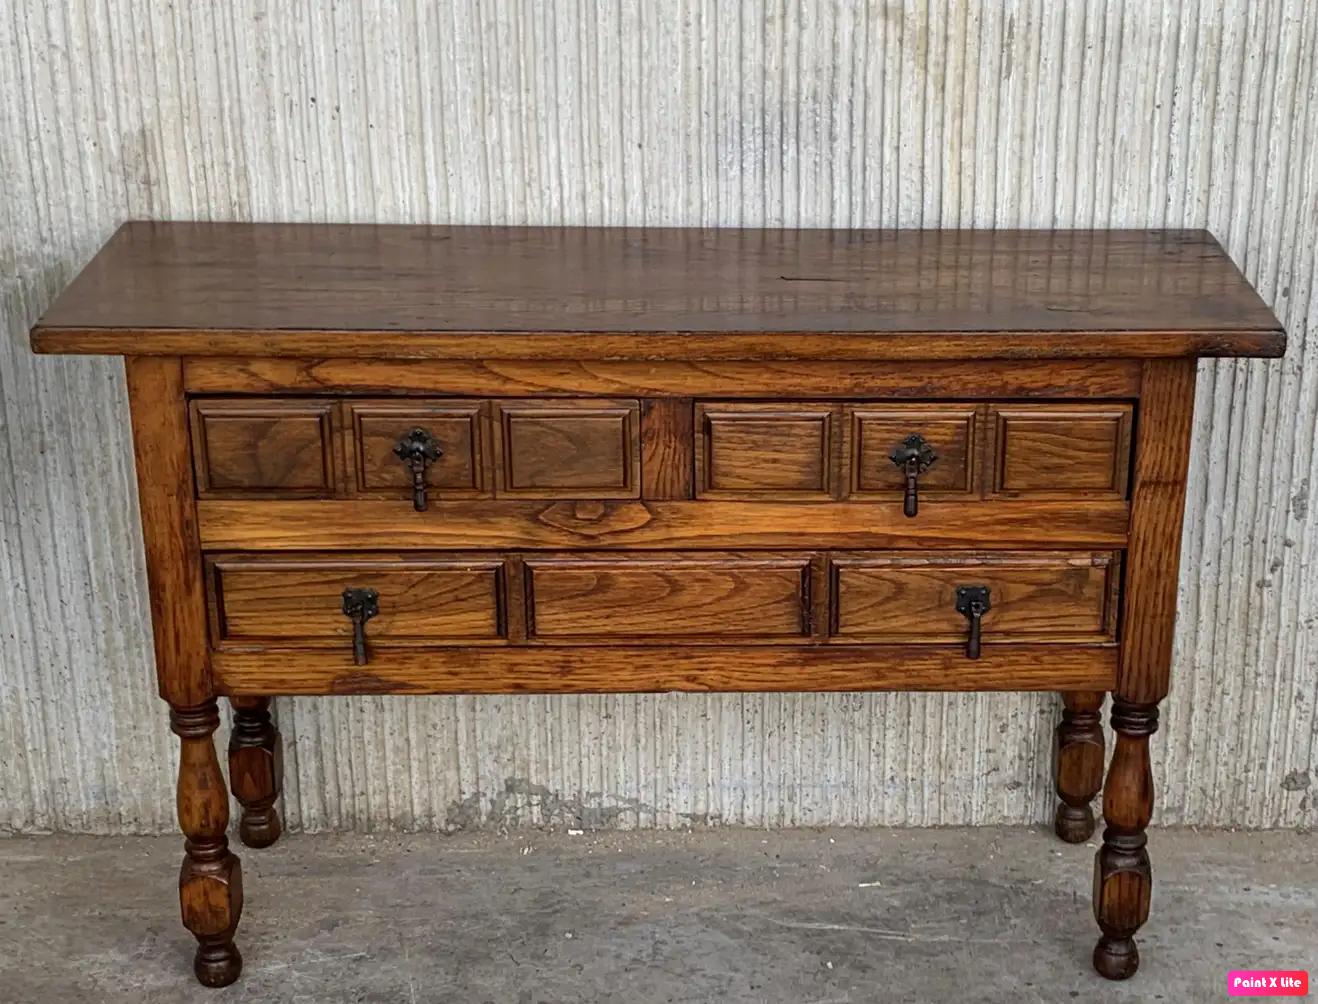 20th century Spanish antique pine (mobila) console sofa table with the three drawers and original iron hardware.
You can use like a commode or chest of drawers
This elegant antique pine console was crafted in Spain, circa 1900. The sofa table with